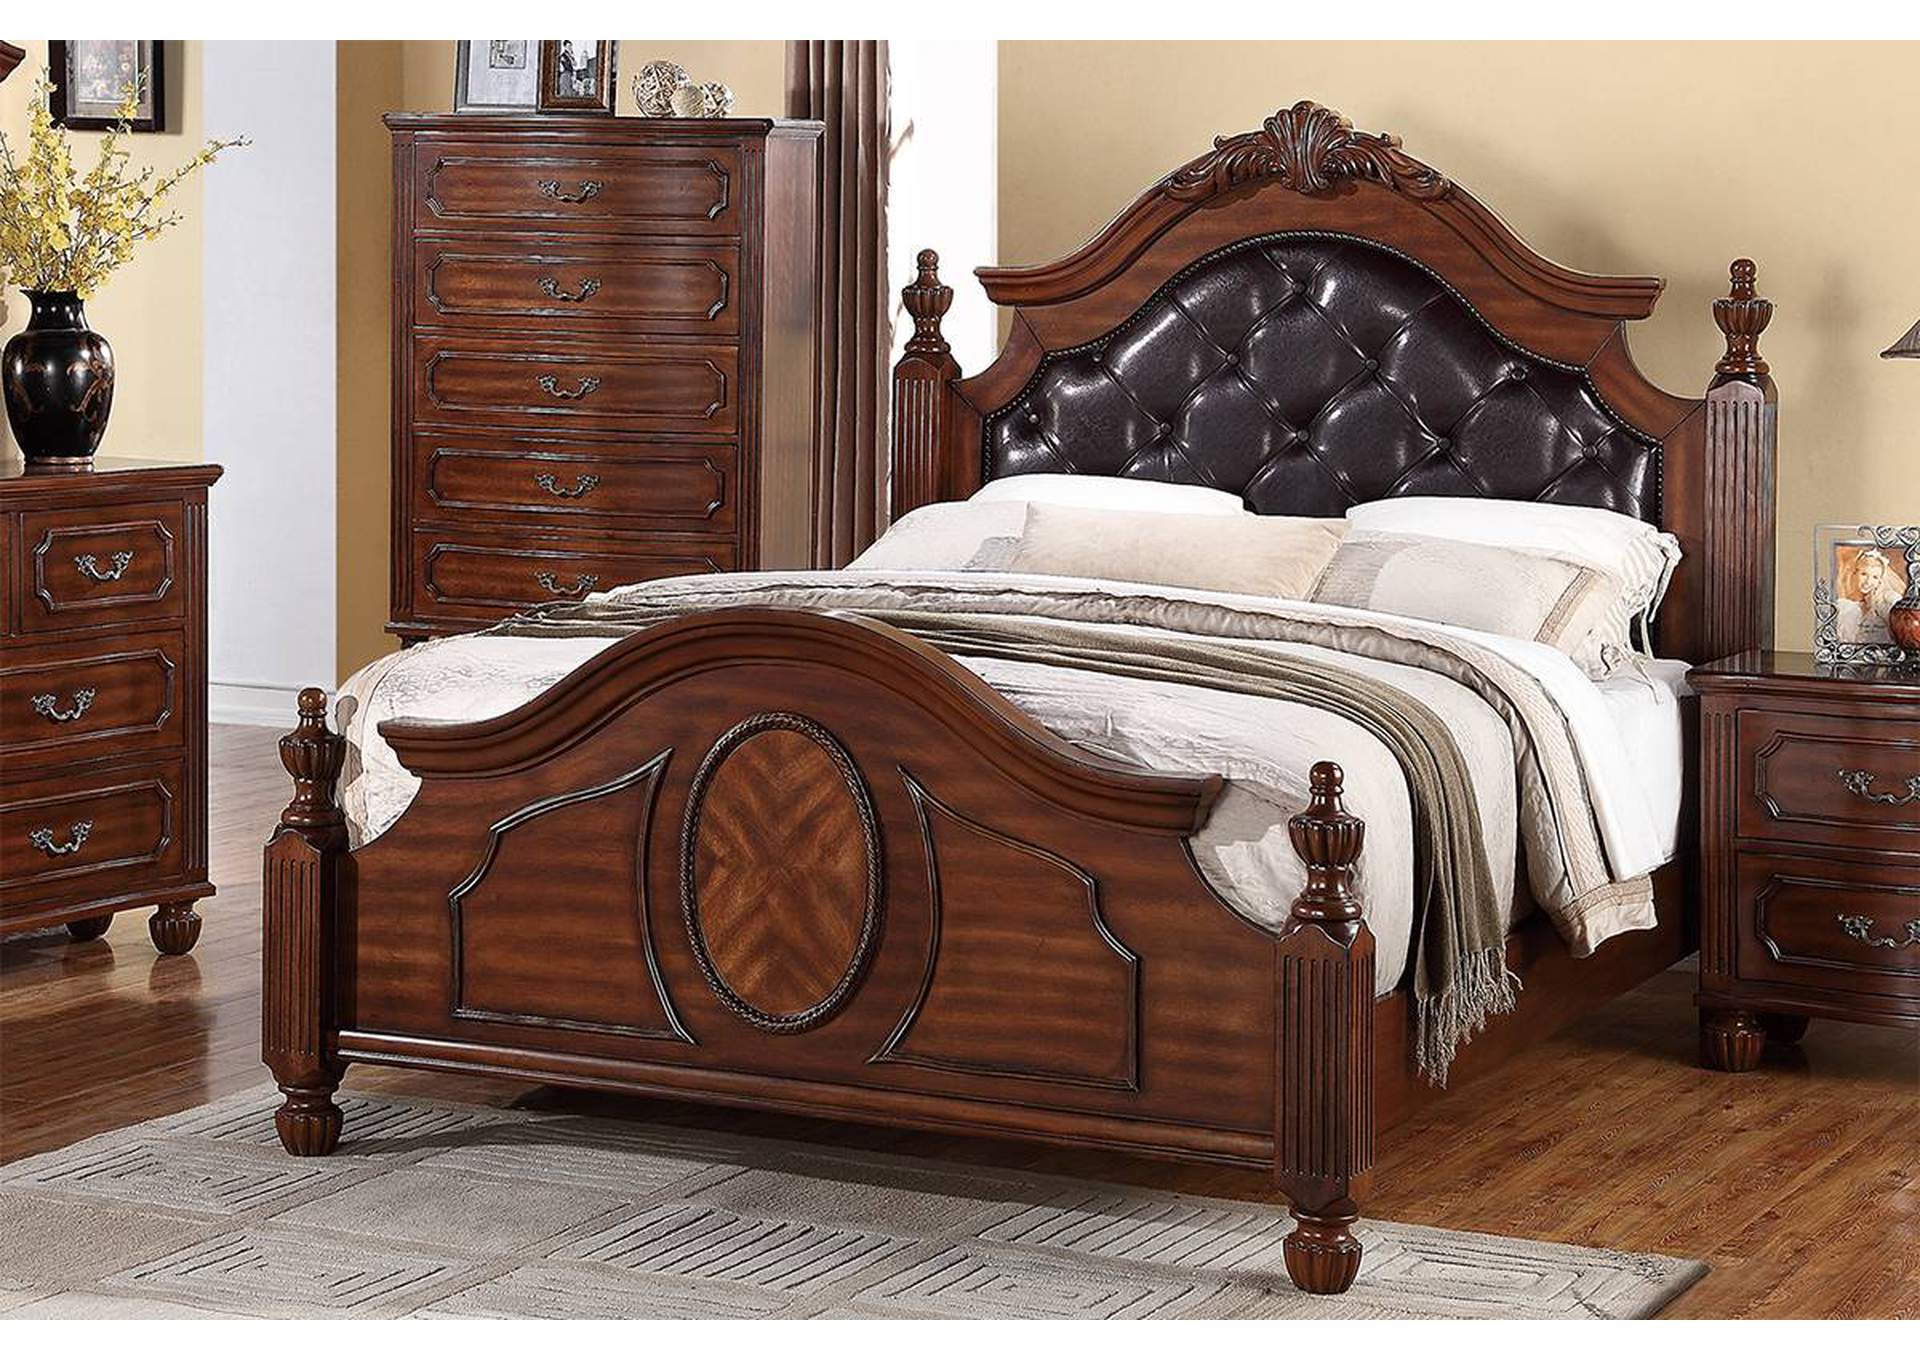 Queen Bed Sarah Furniture, Accessories & More